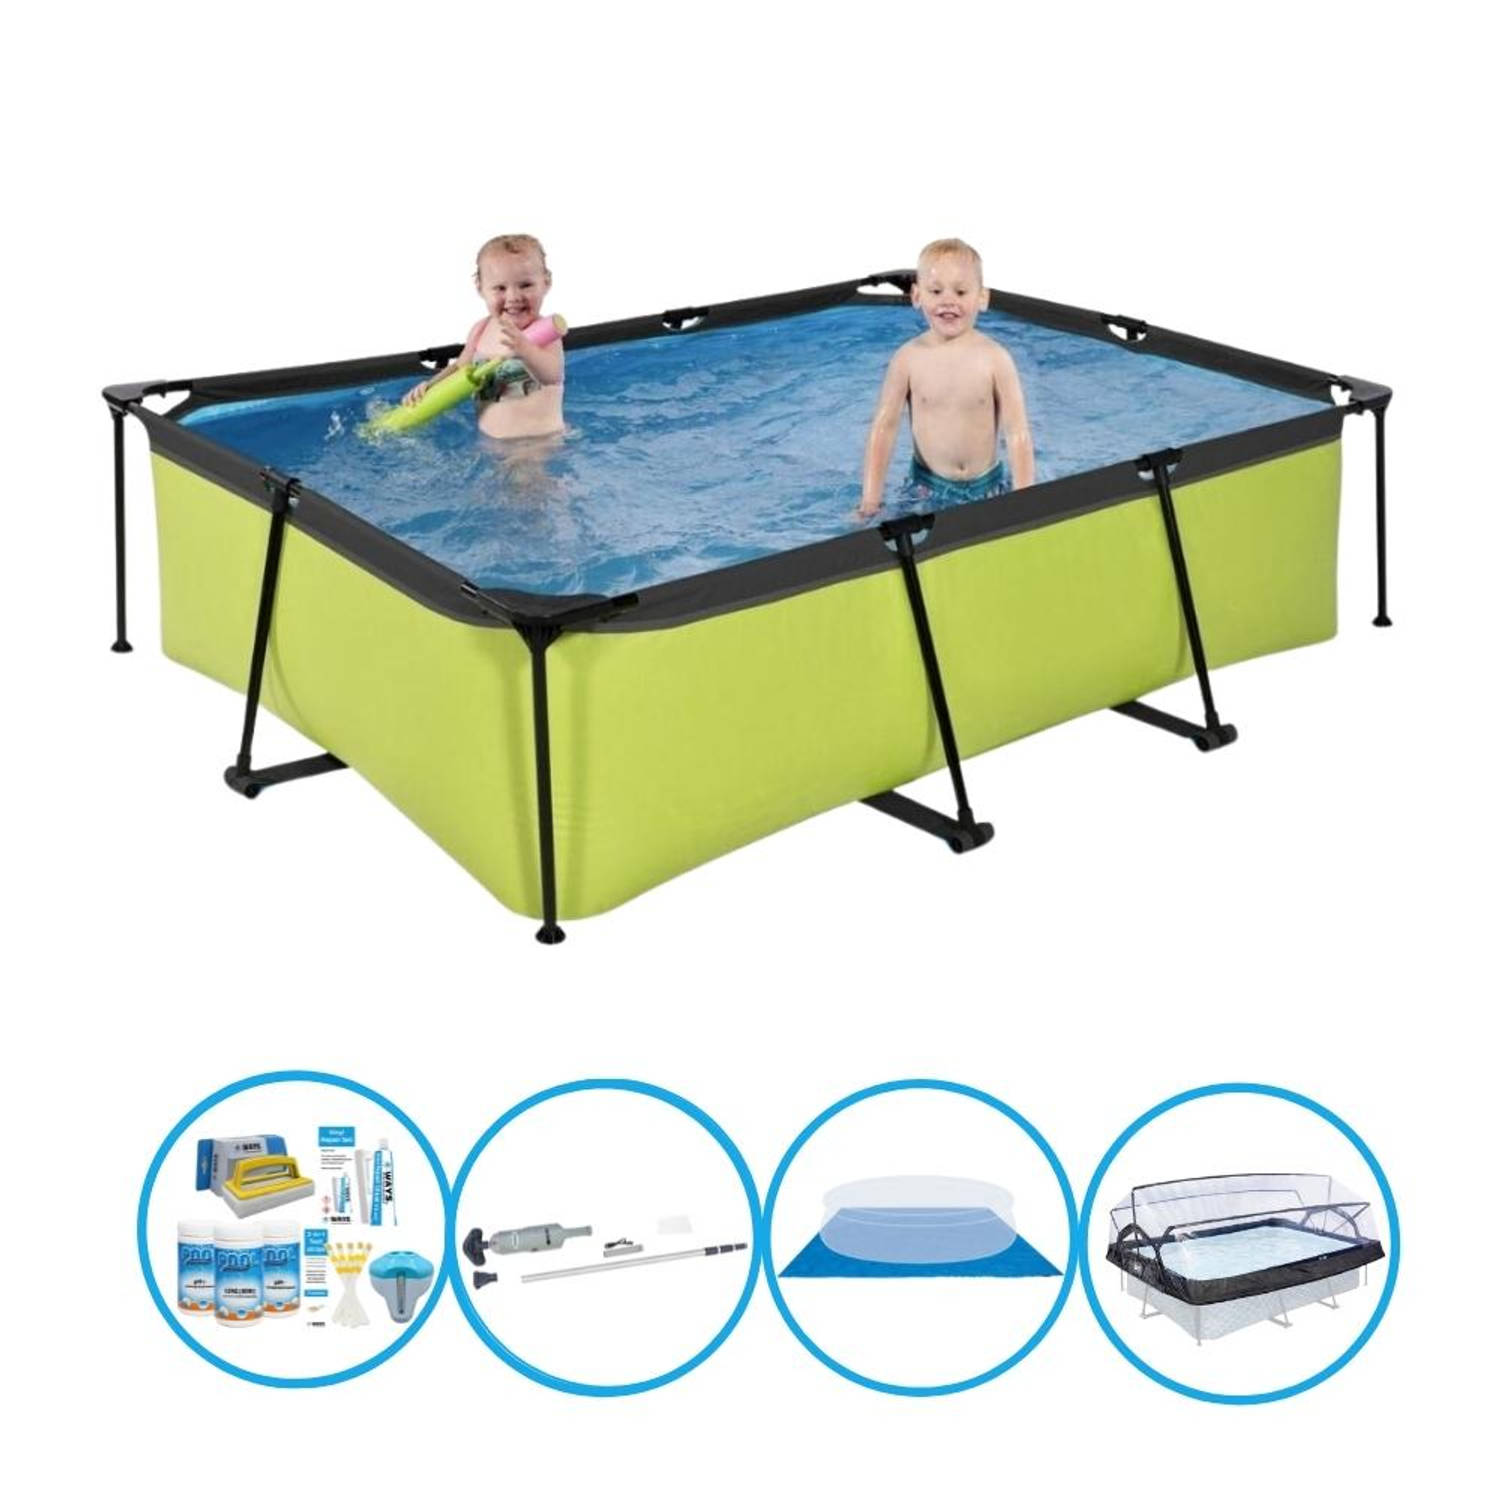 EXIT Zwembad Lime - 220x150x60 cm - Frame Pool - Complete zwembadset